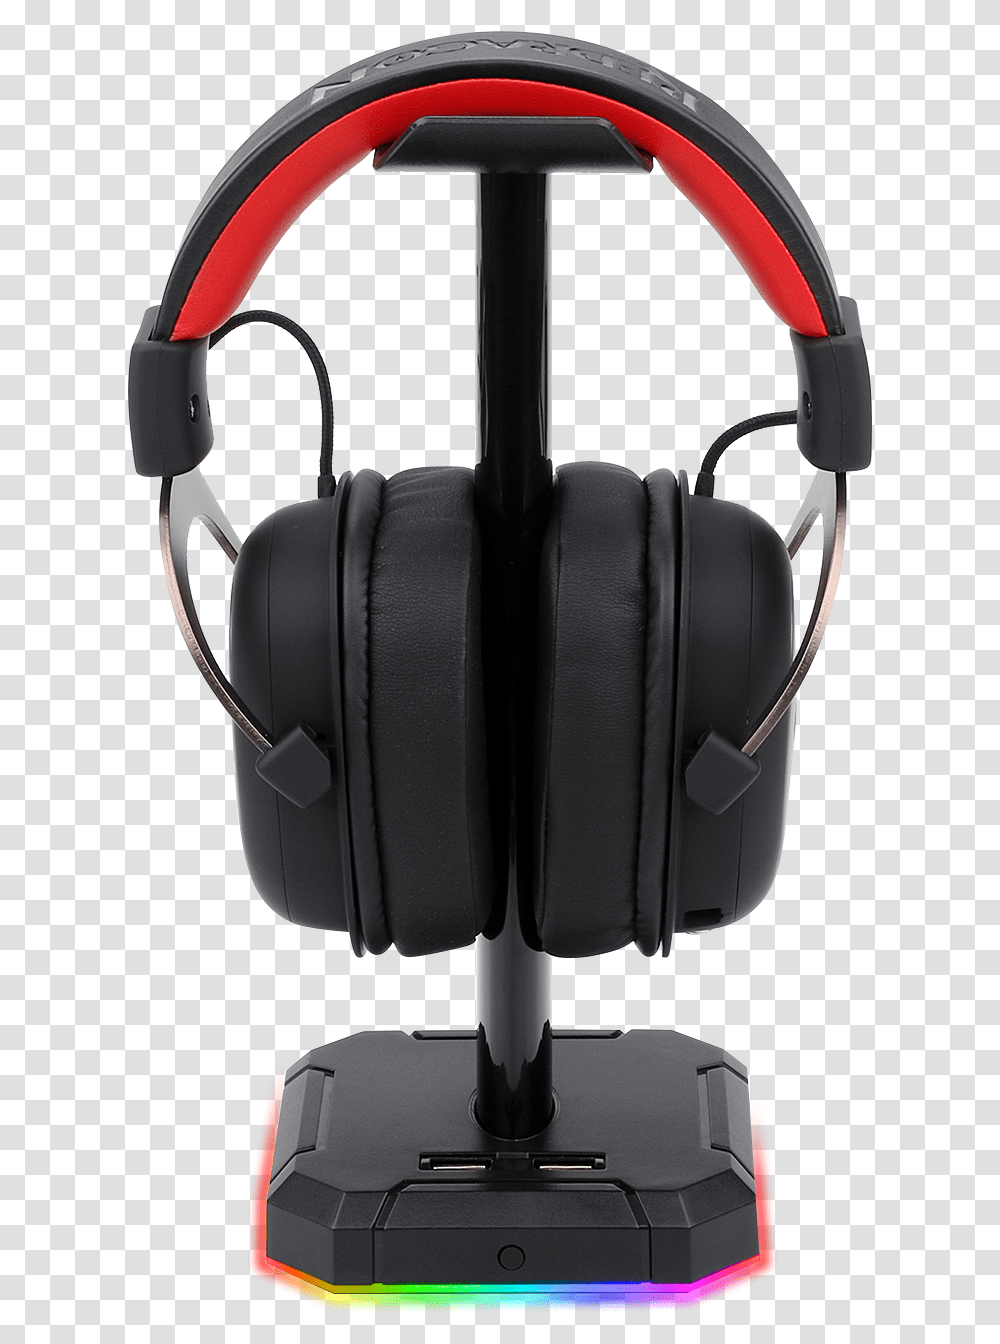 Redragon Ha300 Scepter Pro Headset Stand Redragon Scepter, Electronics, Headphones, Luggage Transparent Png